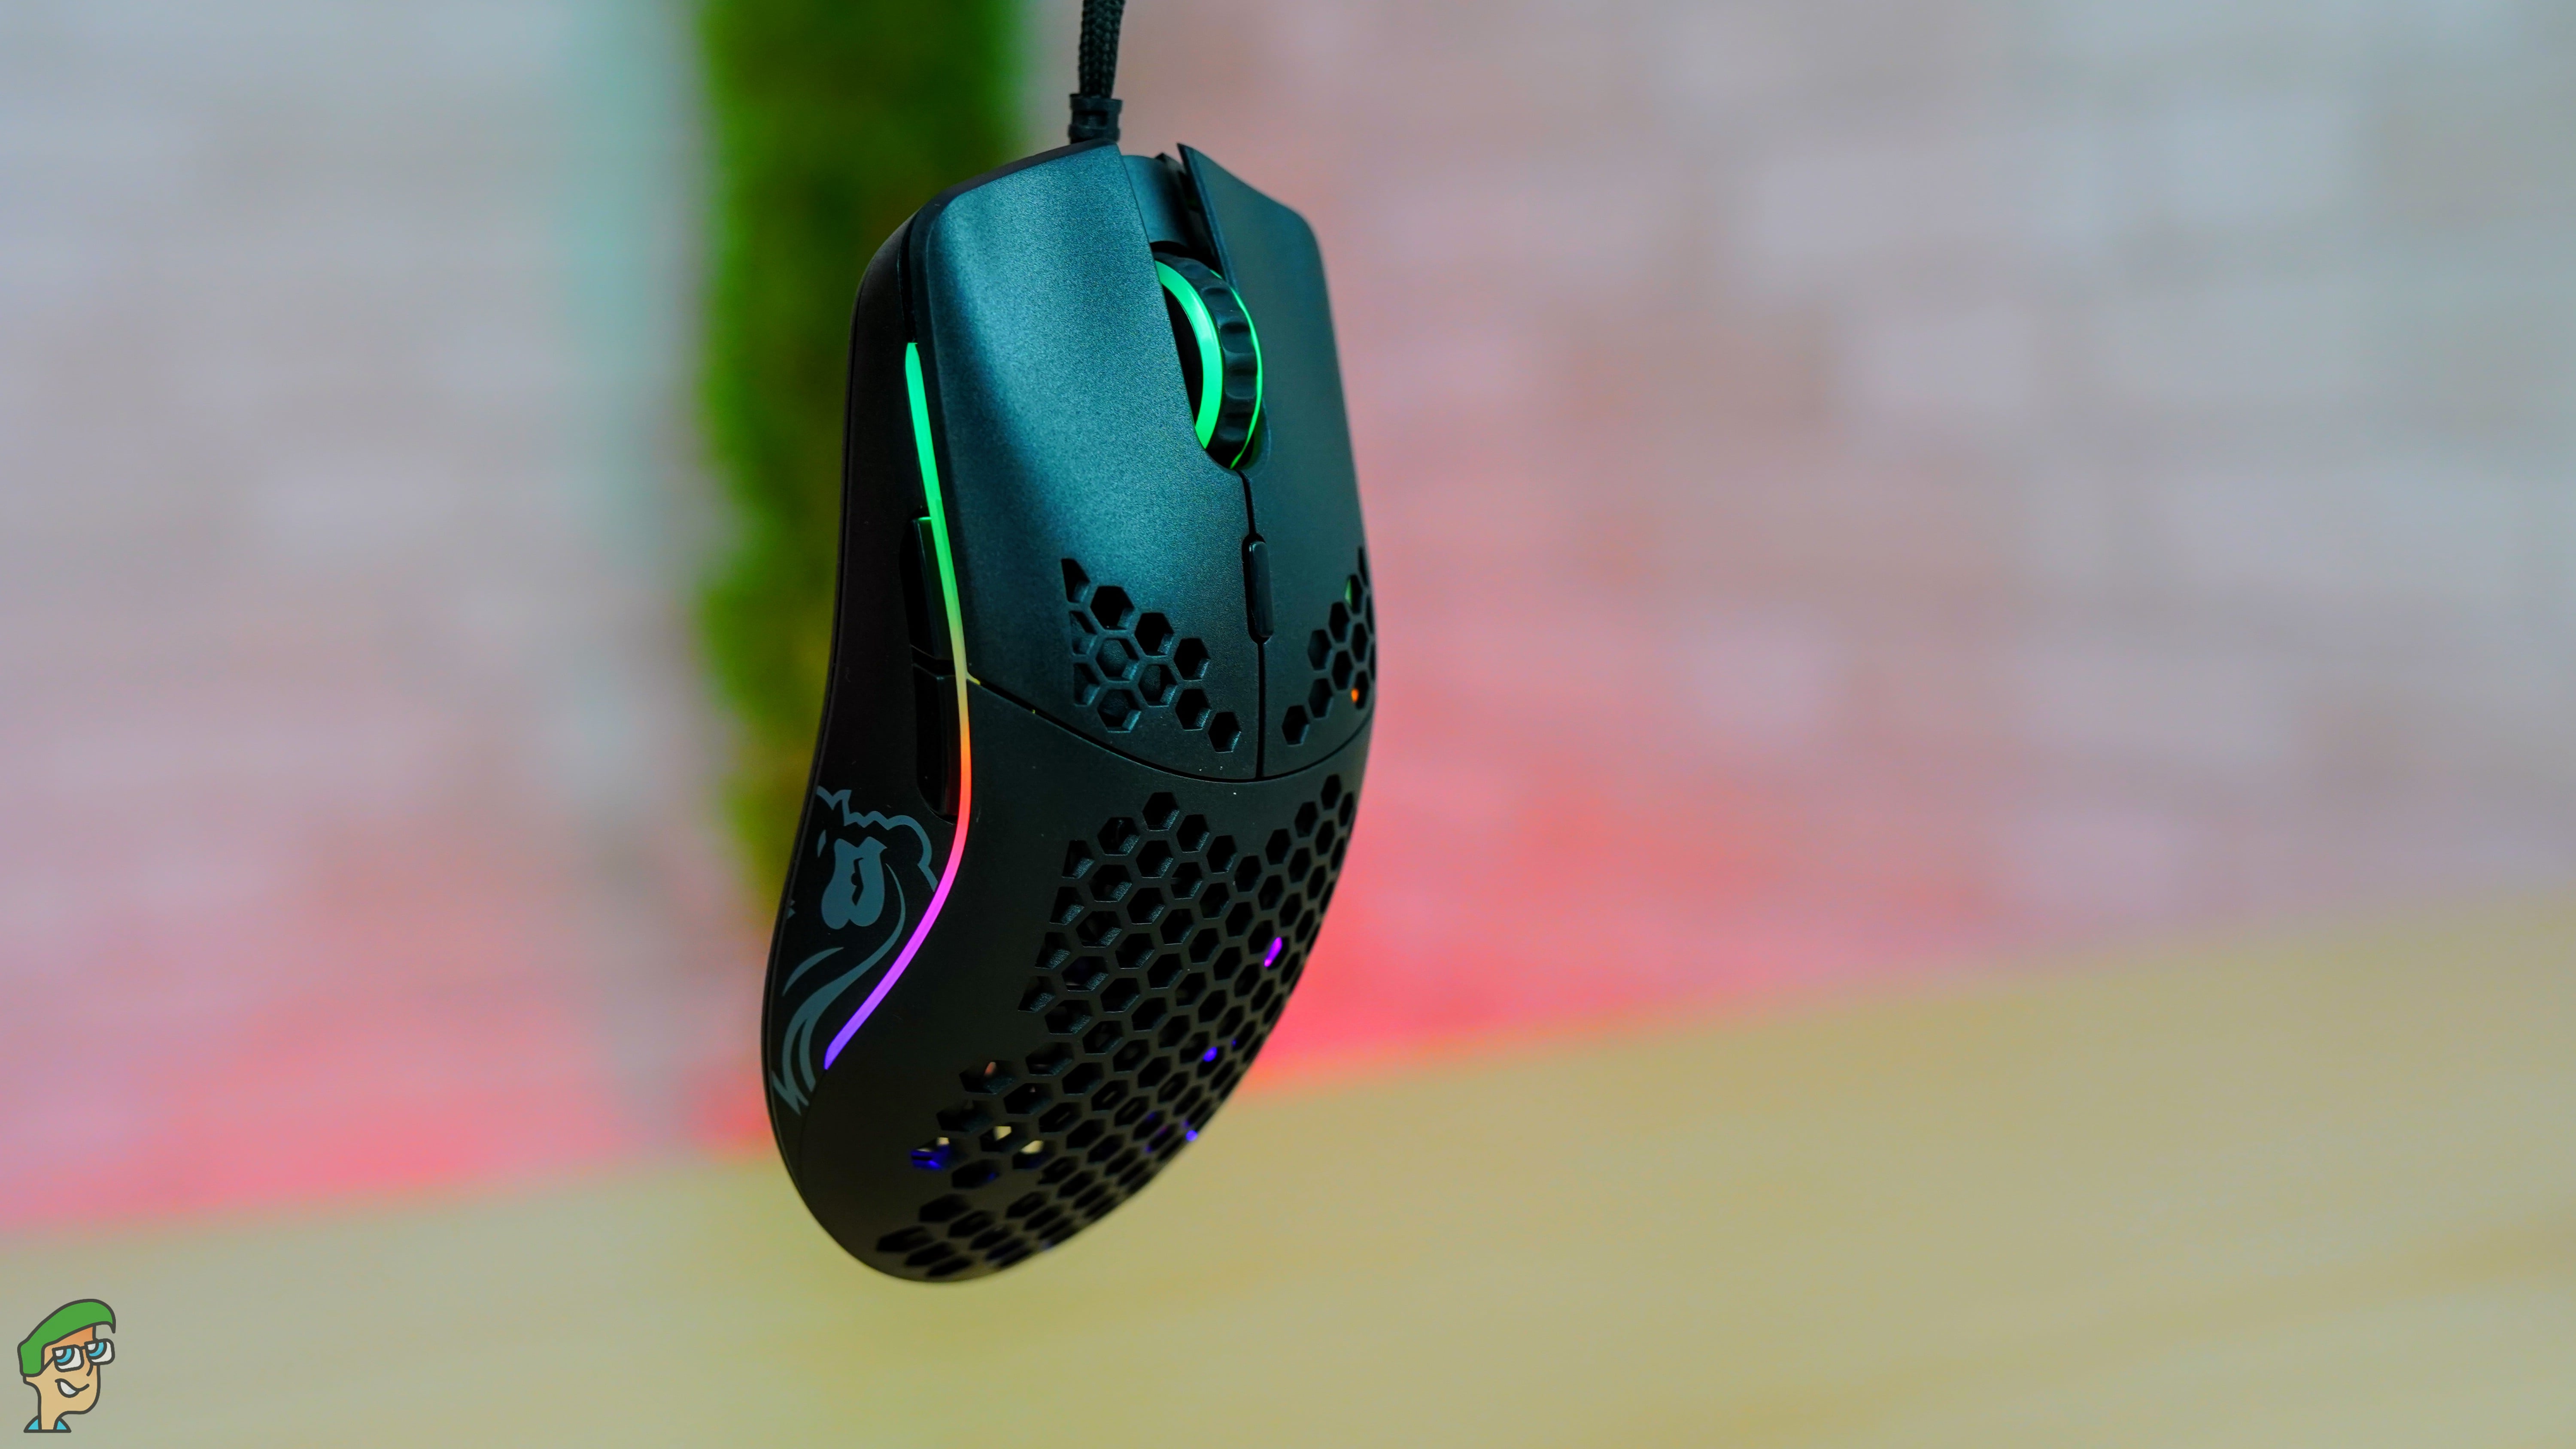 PC Gaming Race Glorious Model O Mouse Review